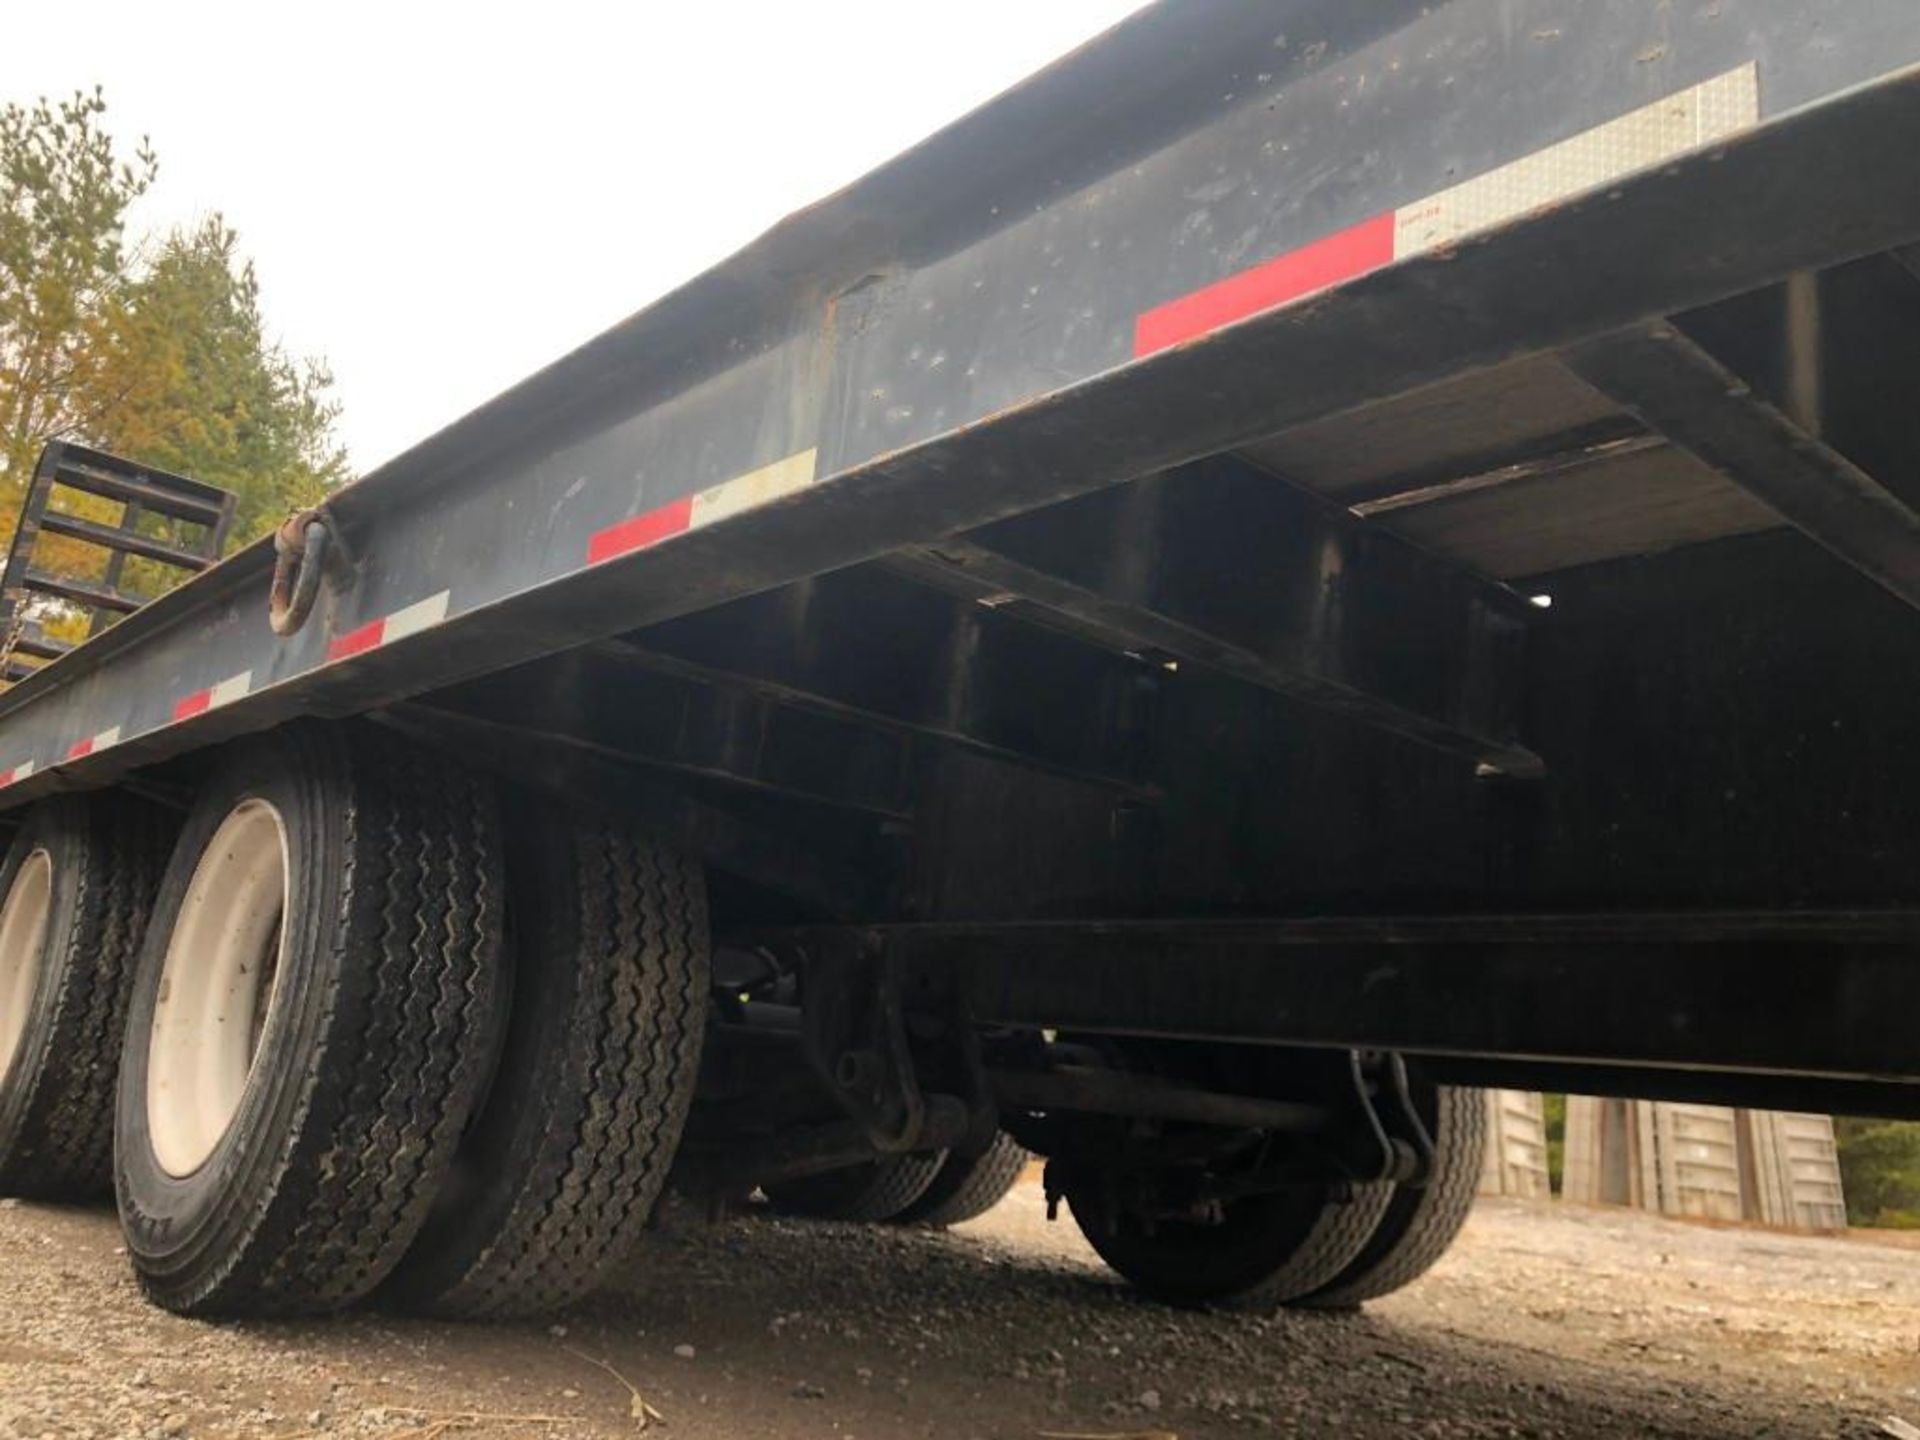 2013 LB35-T Haulass Trailer, VIN # 5JYLB3526EP140069, 101" x 21' Deck with ramps, Located in - Image 17 of 18